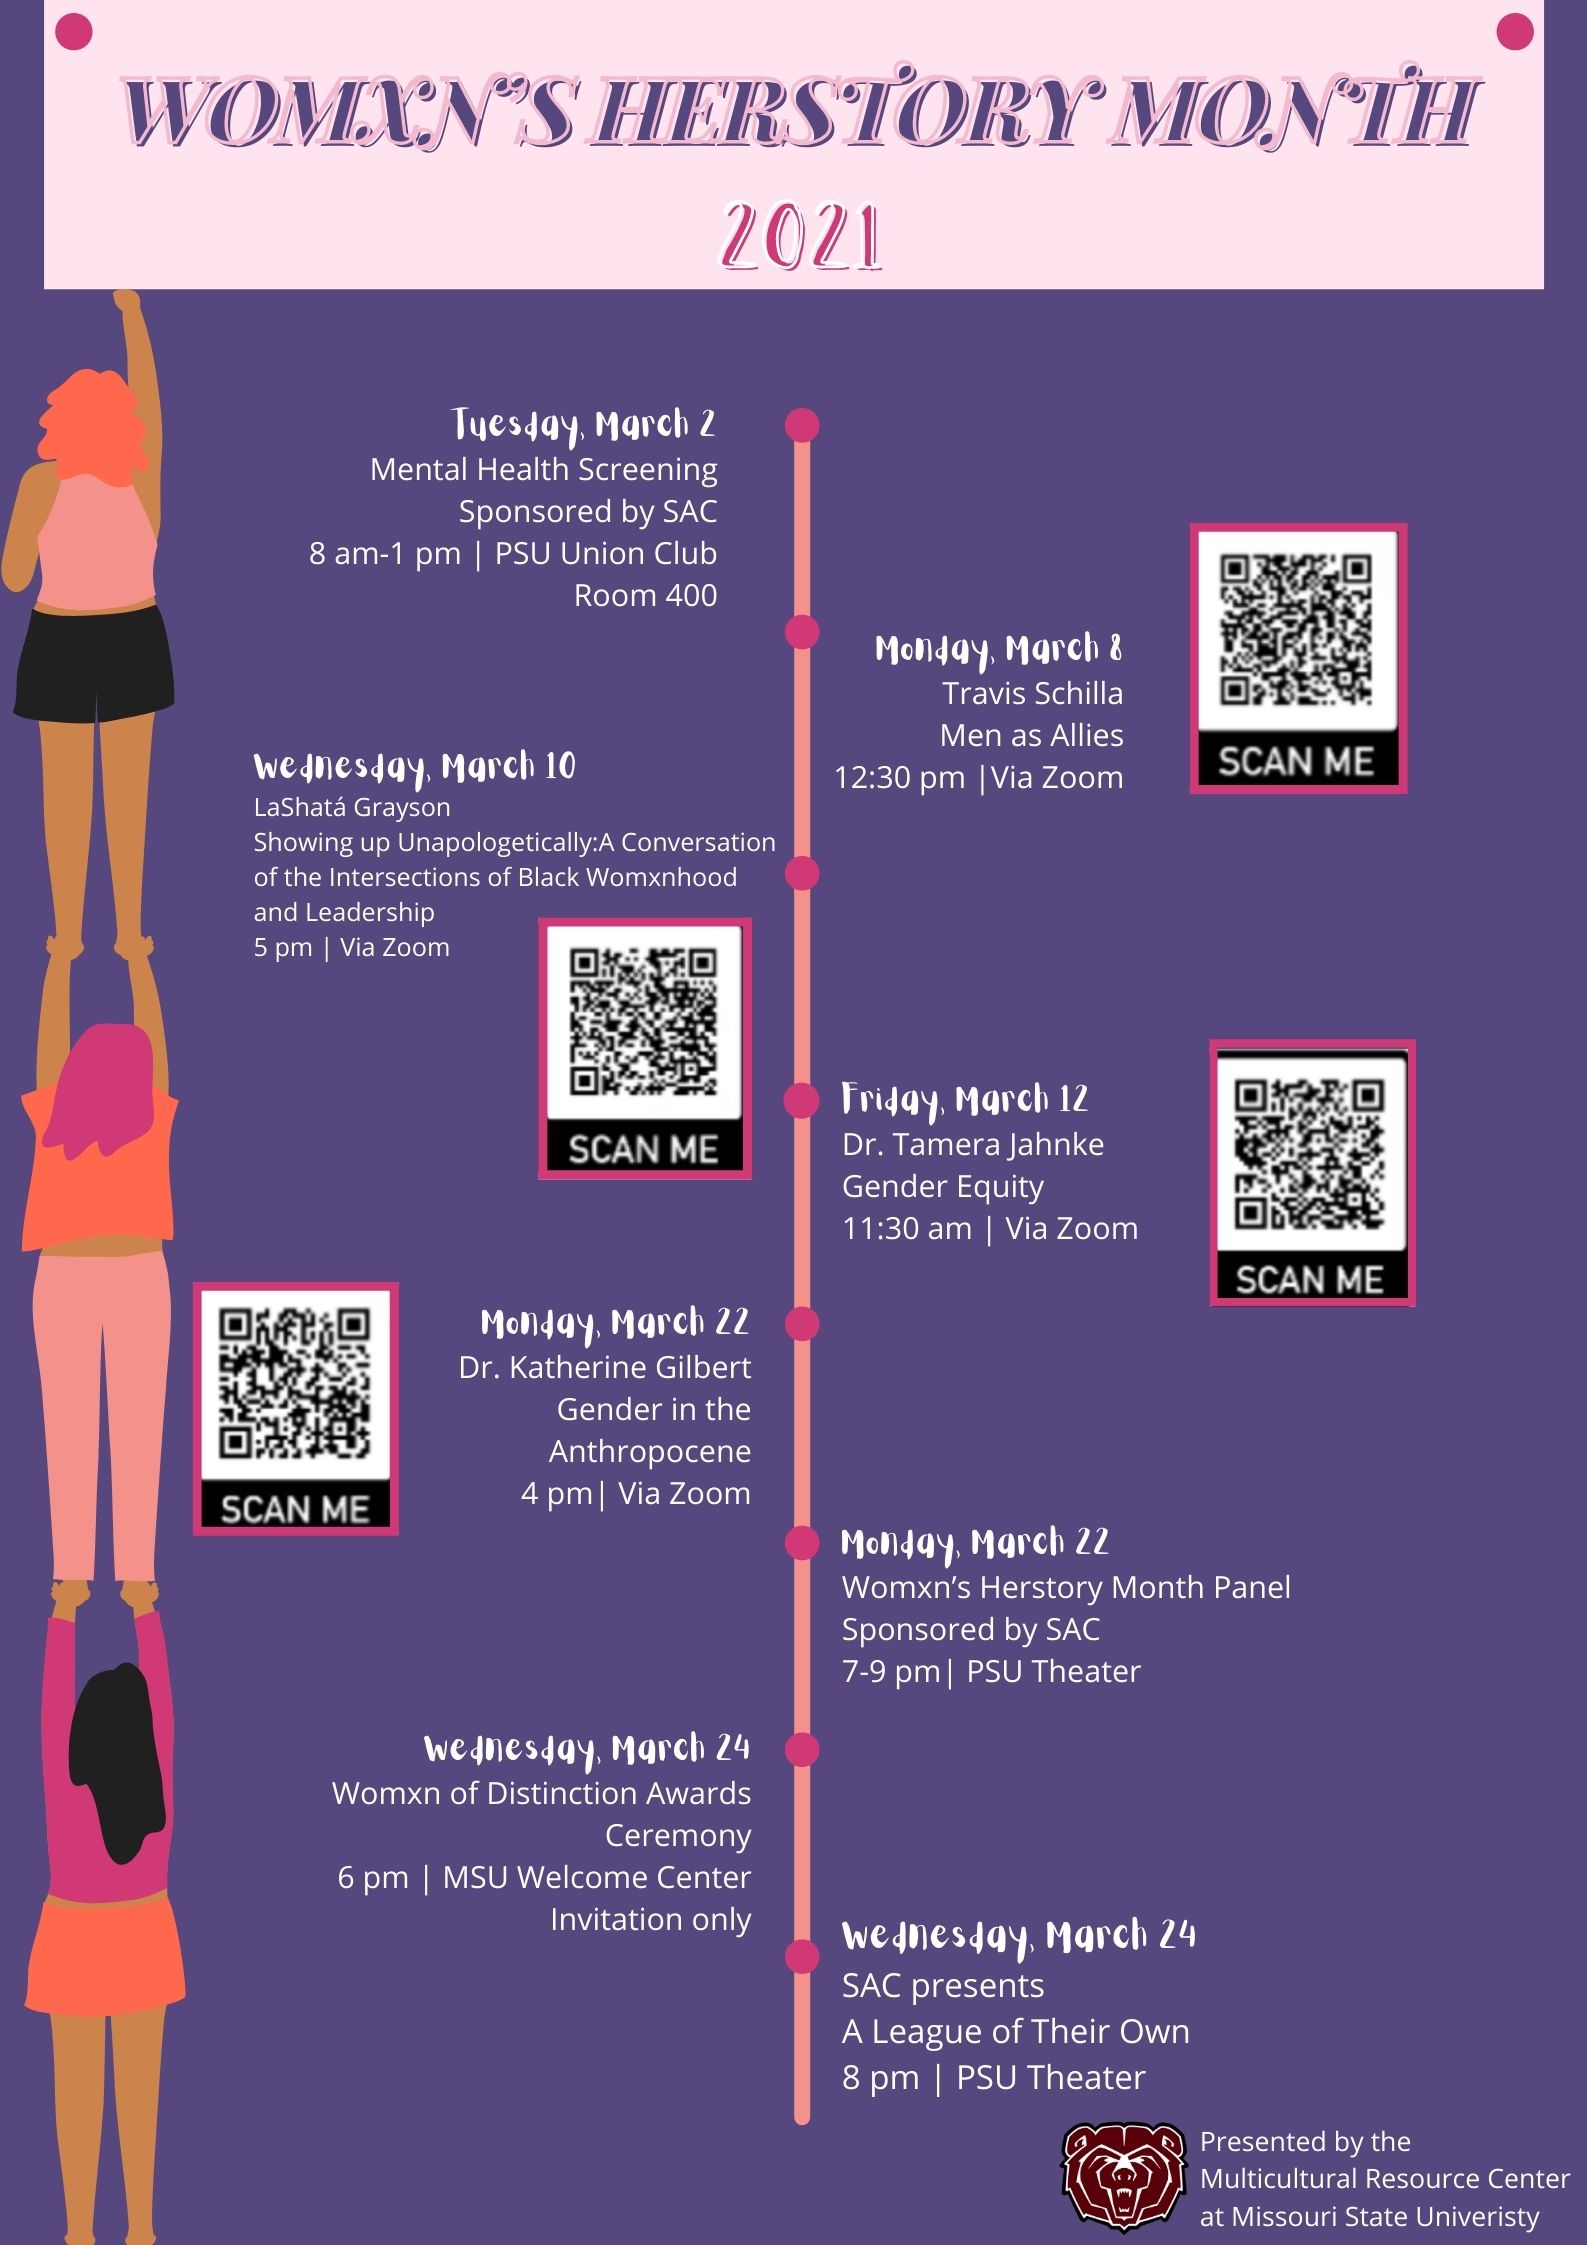 Calendar listing Women's History Month events